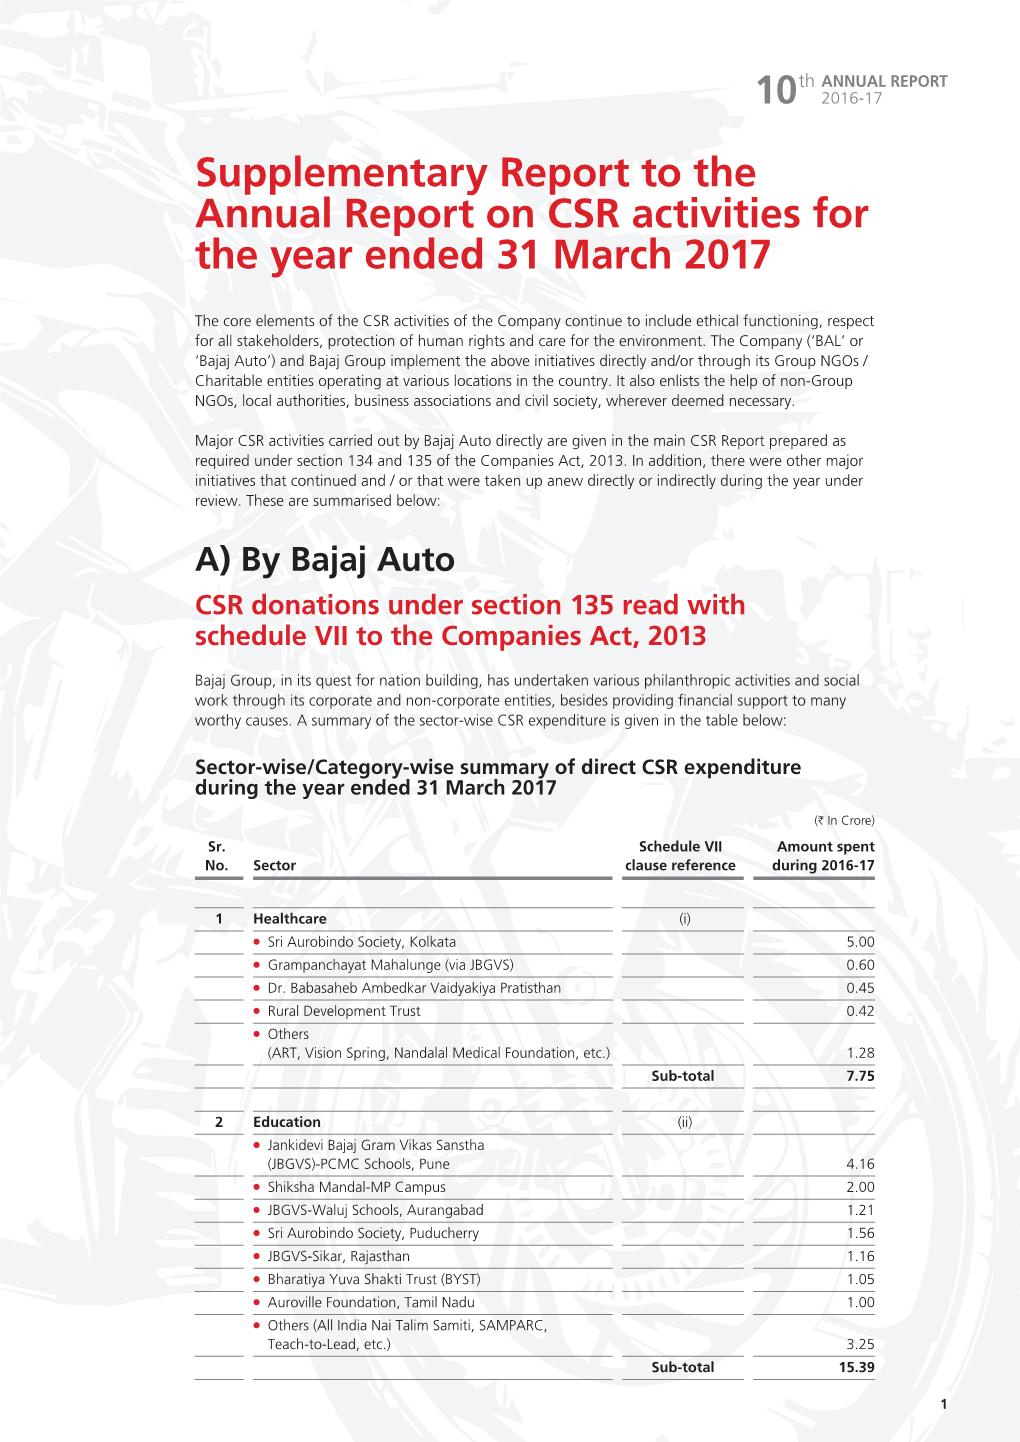 Supplementary Report to the Annual Report on CSR Activities for the Year Ended 31 March 2017